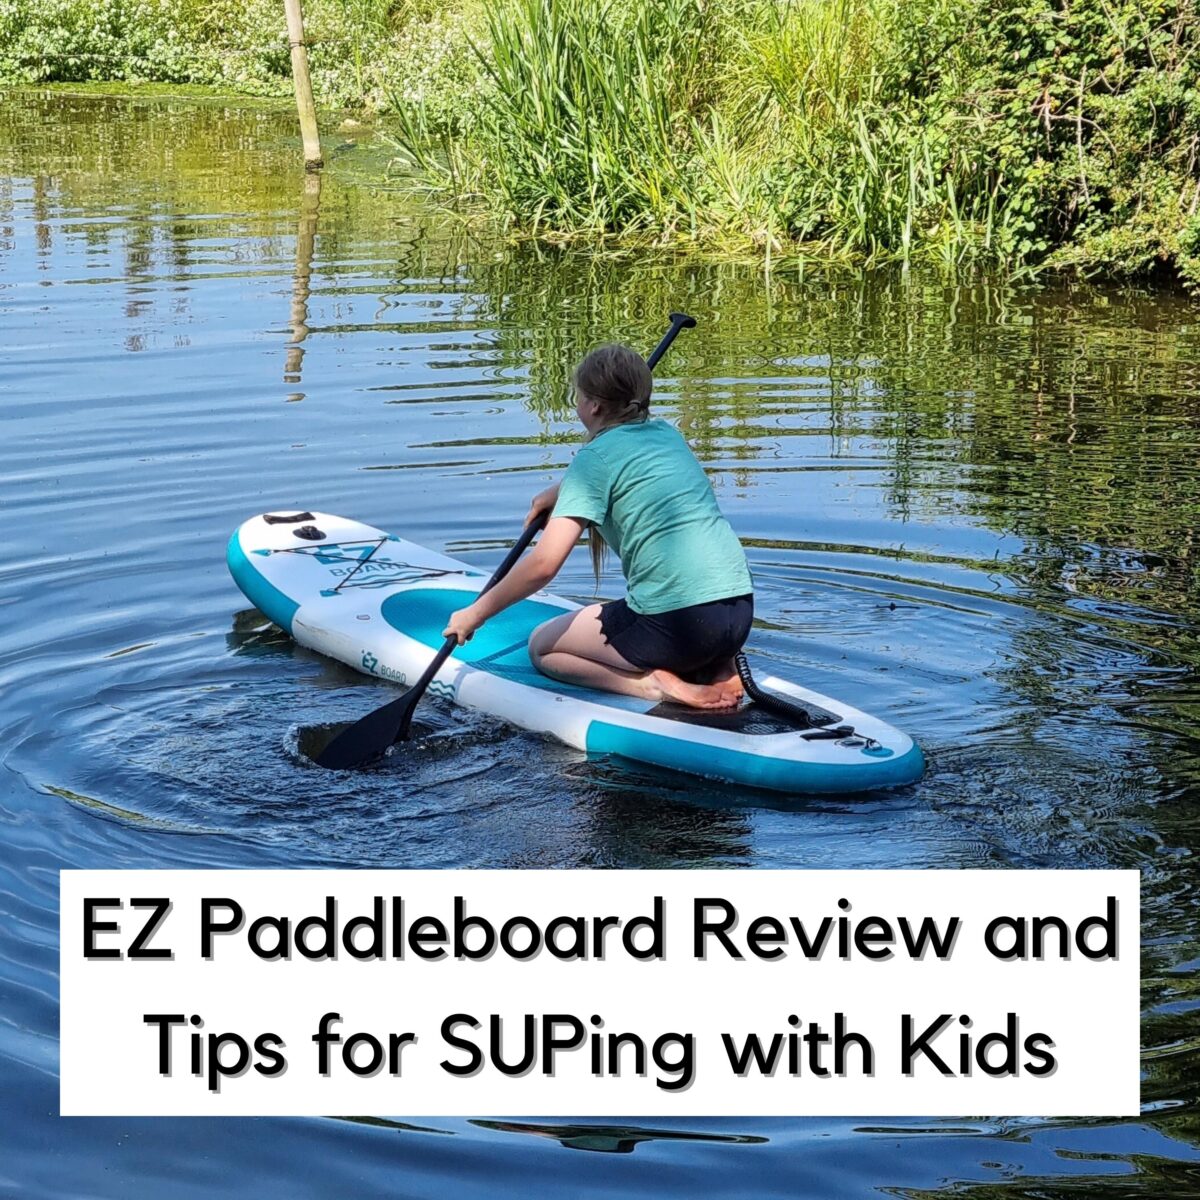 Square image of a teen on a paddleboard kneeling on a river in the UK. Text reads EZ Paddleboard Review and Tips for SUPing with Kids.